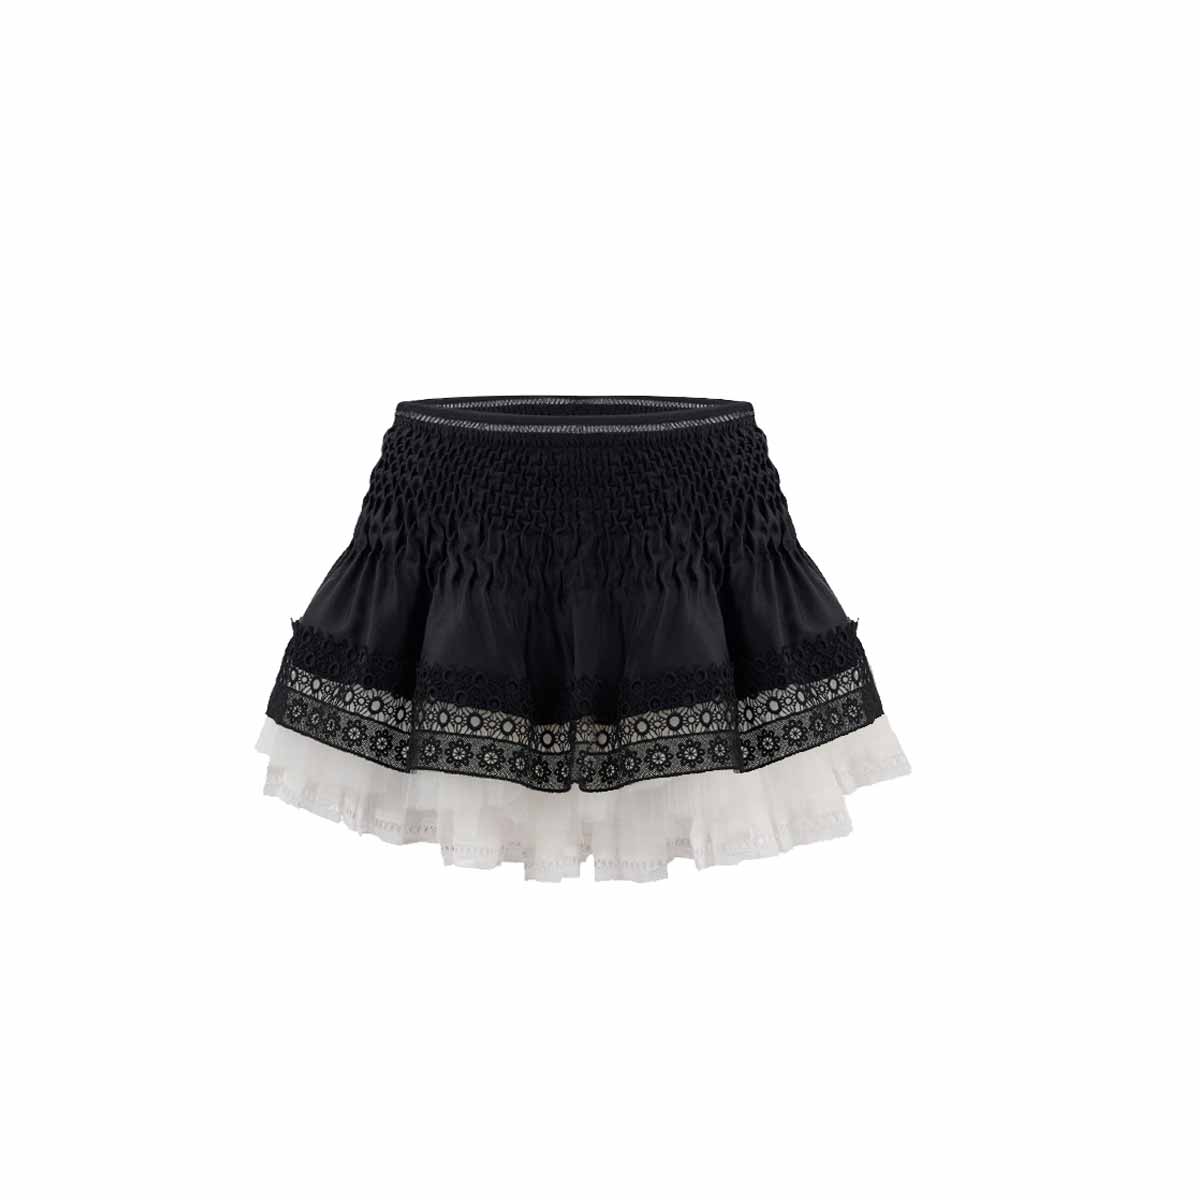 Black Pleated Tennis Skirt Trimmed with White